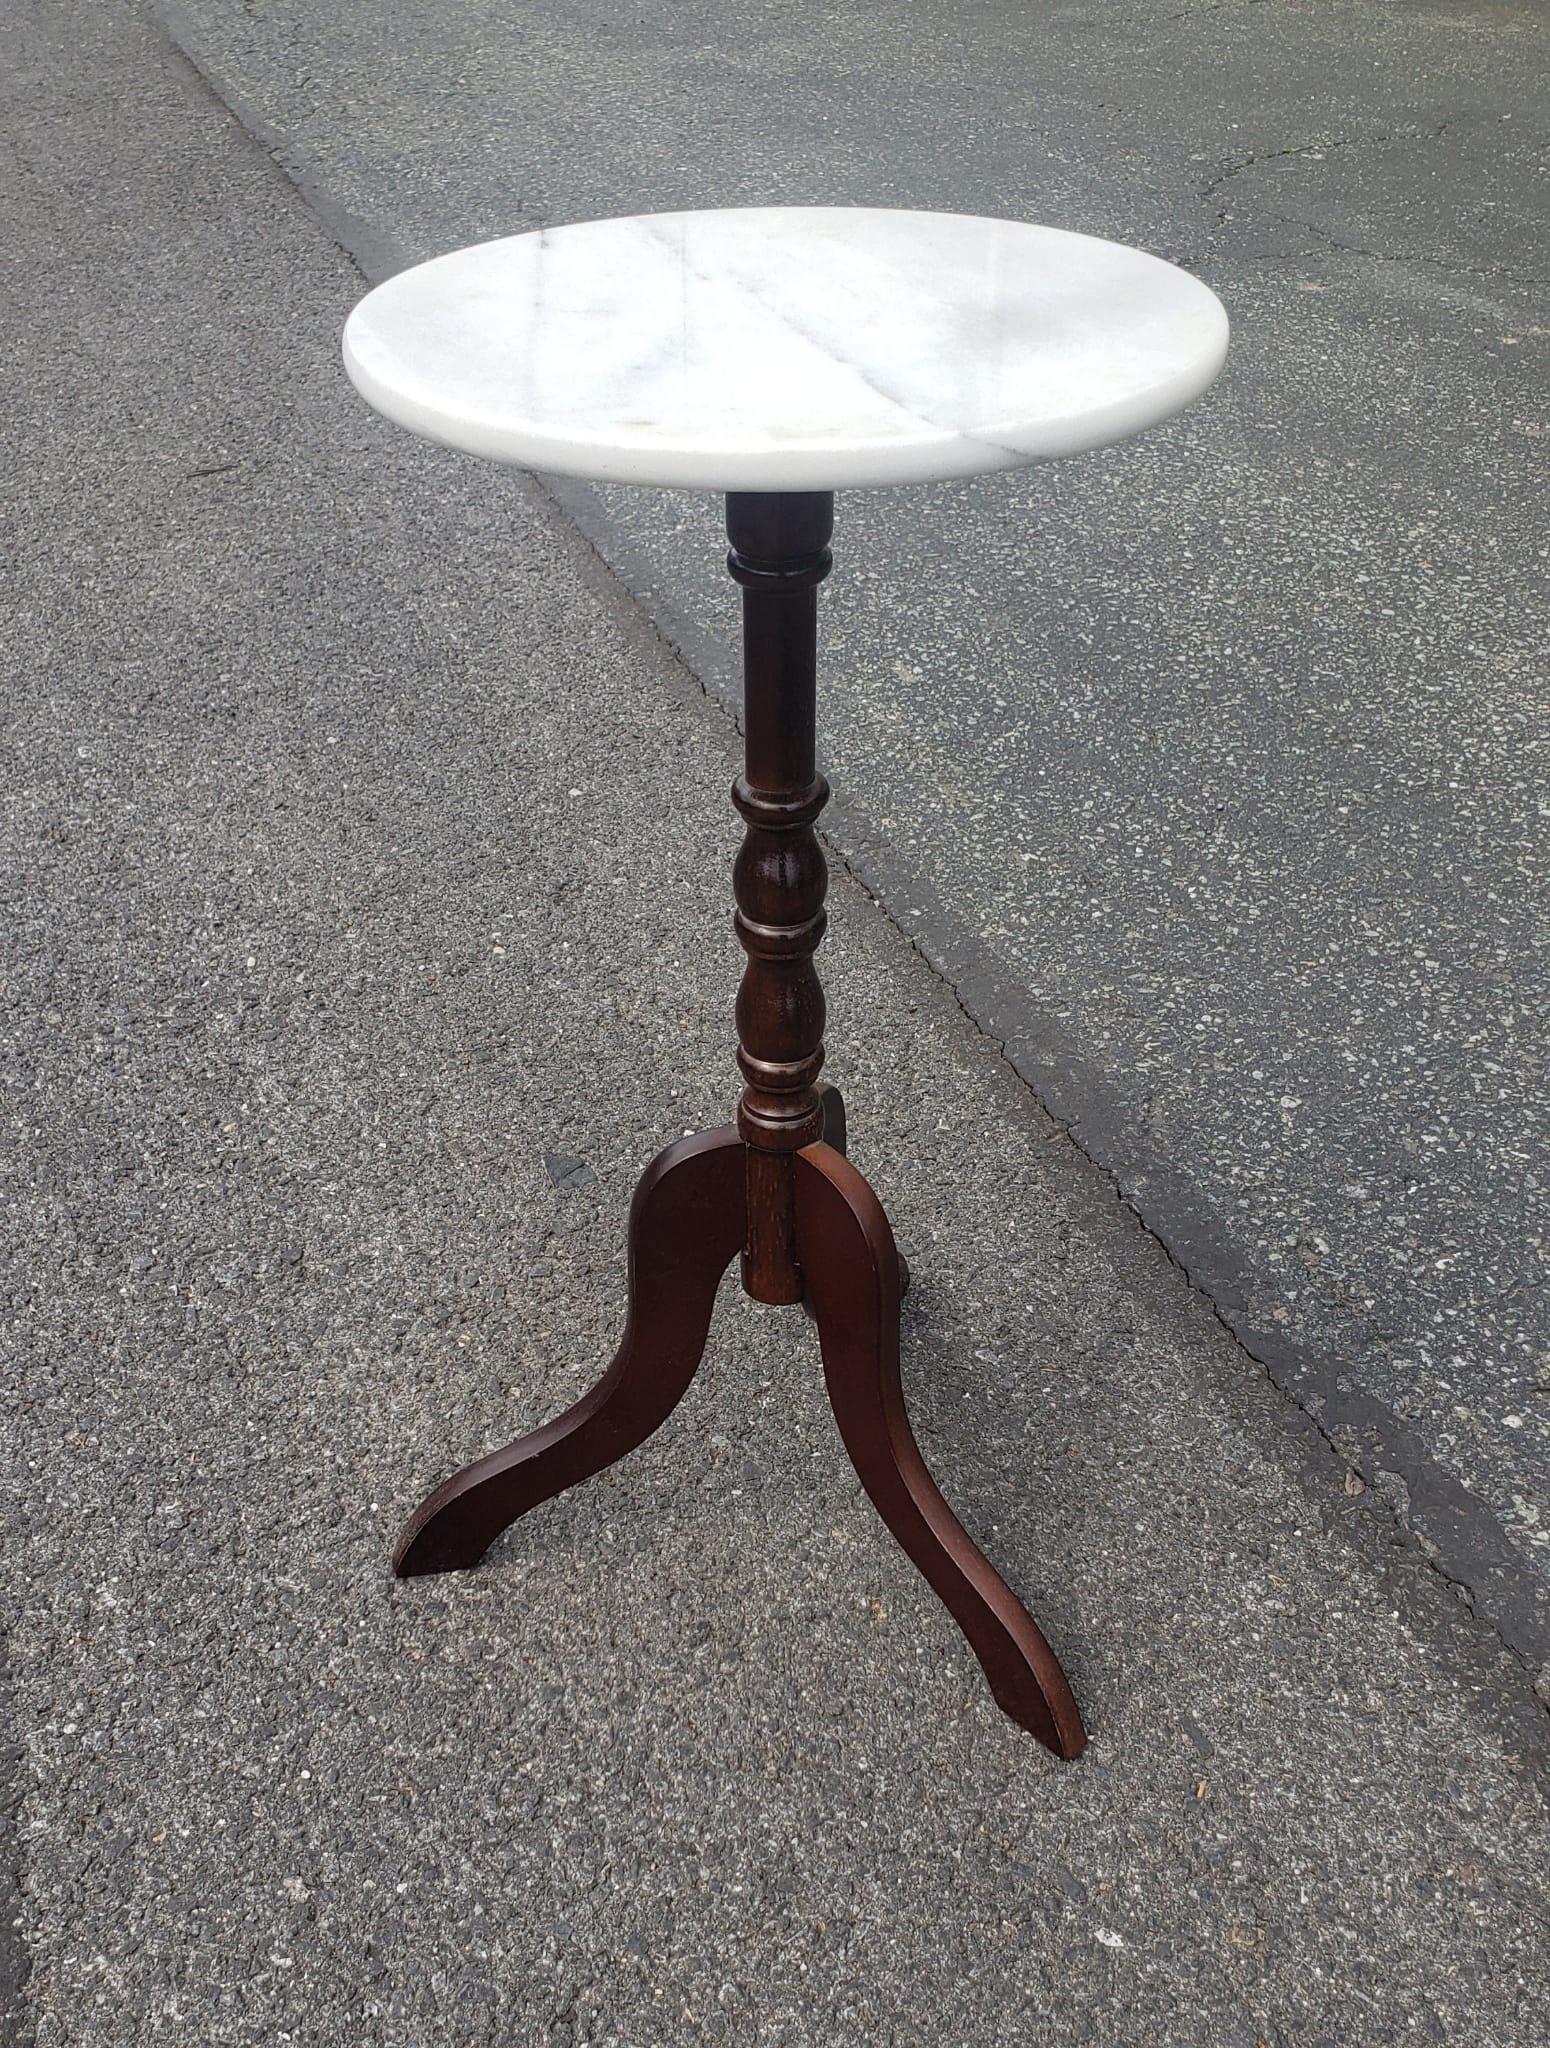 A mahogany pedestal Tripod stand with round marble top. Measure 12